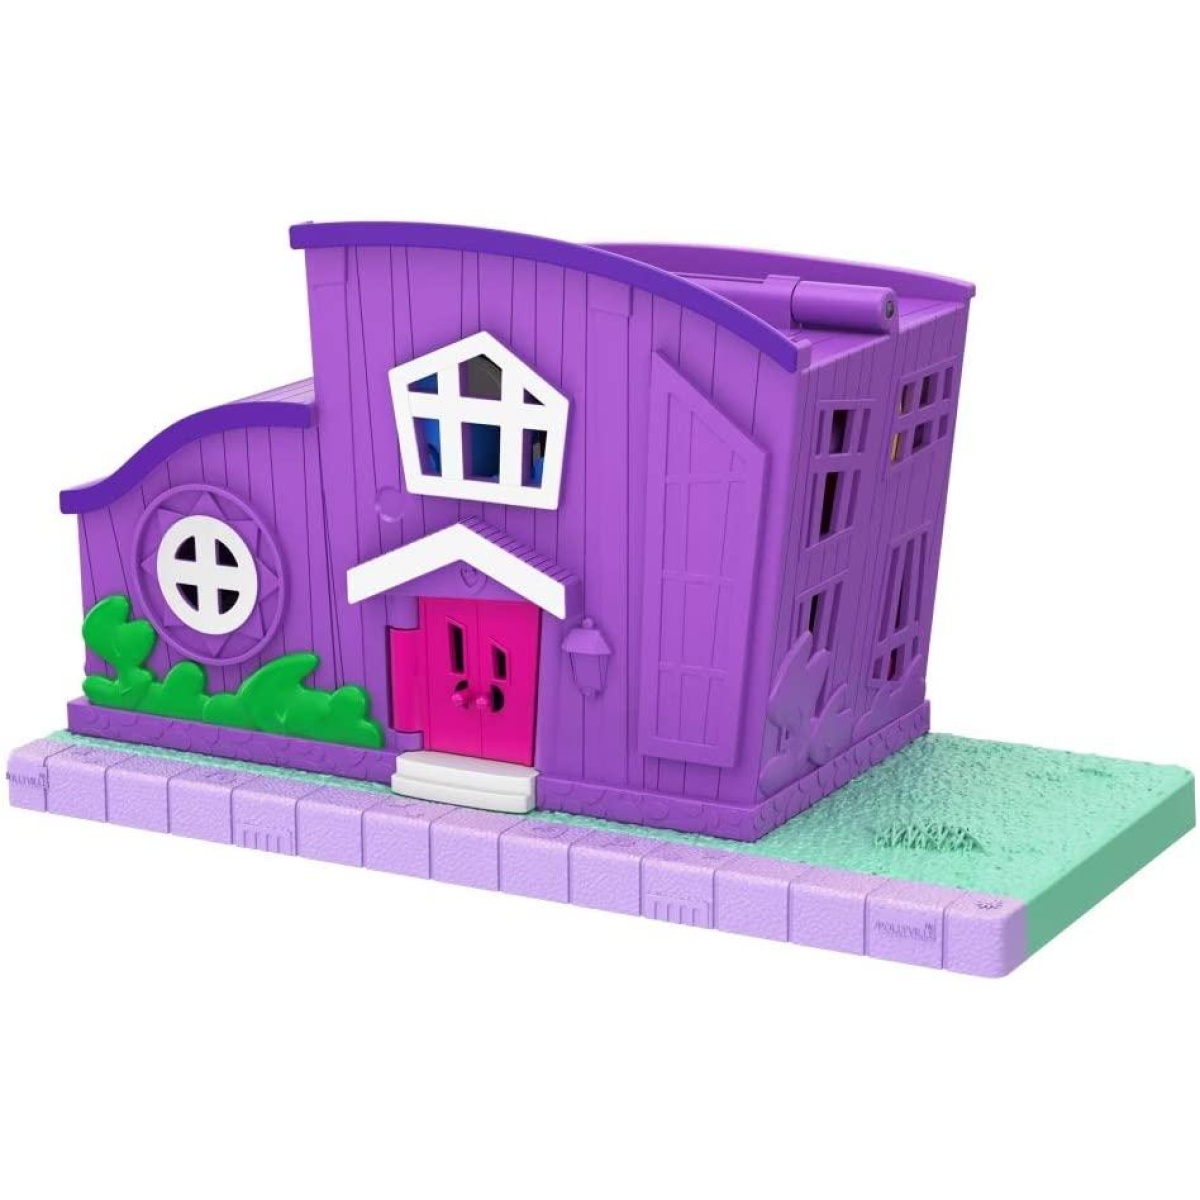 Polly Pocket GFP42-Pollyville 4 story dollhouse NEW Original Packaging 